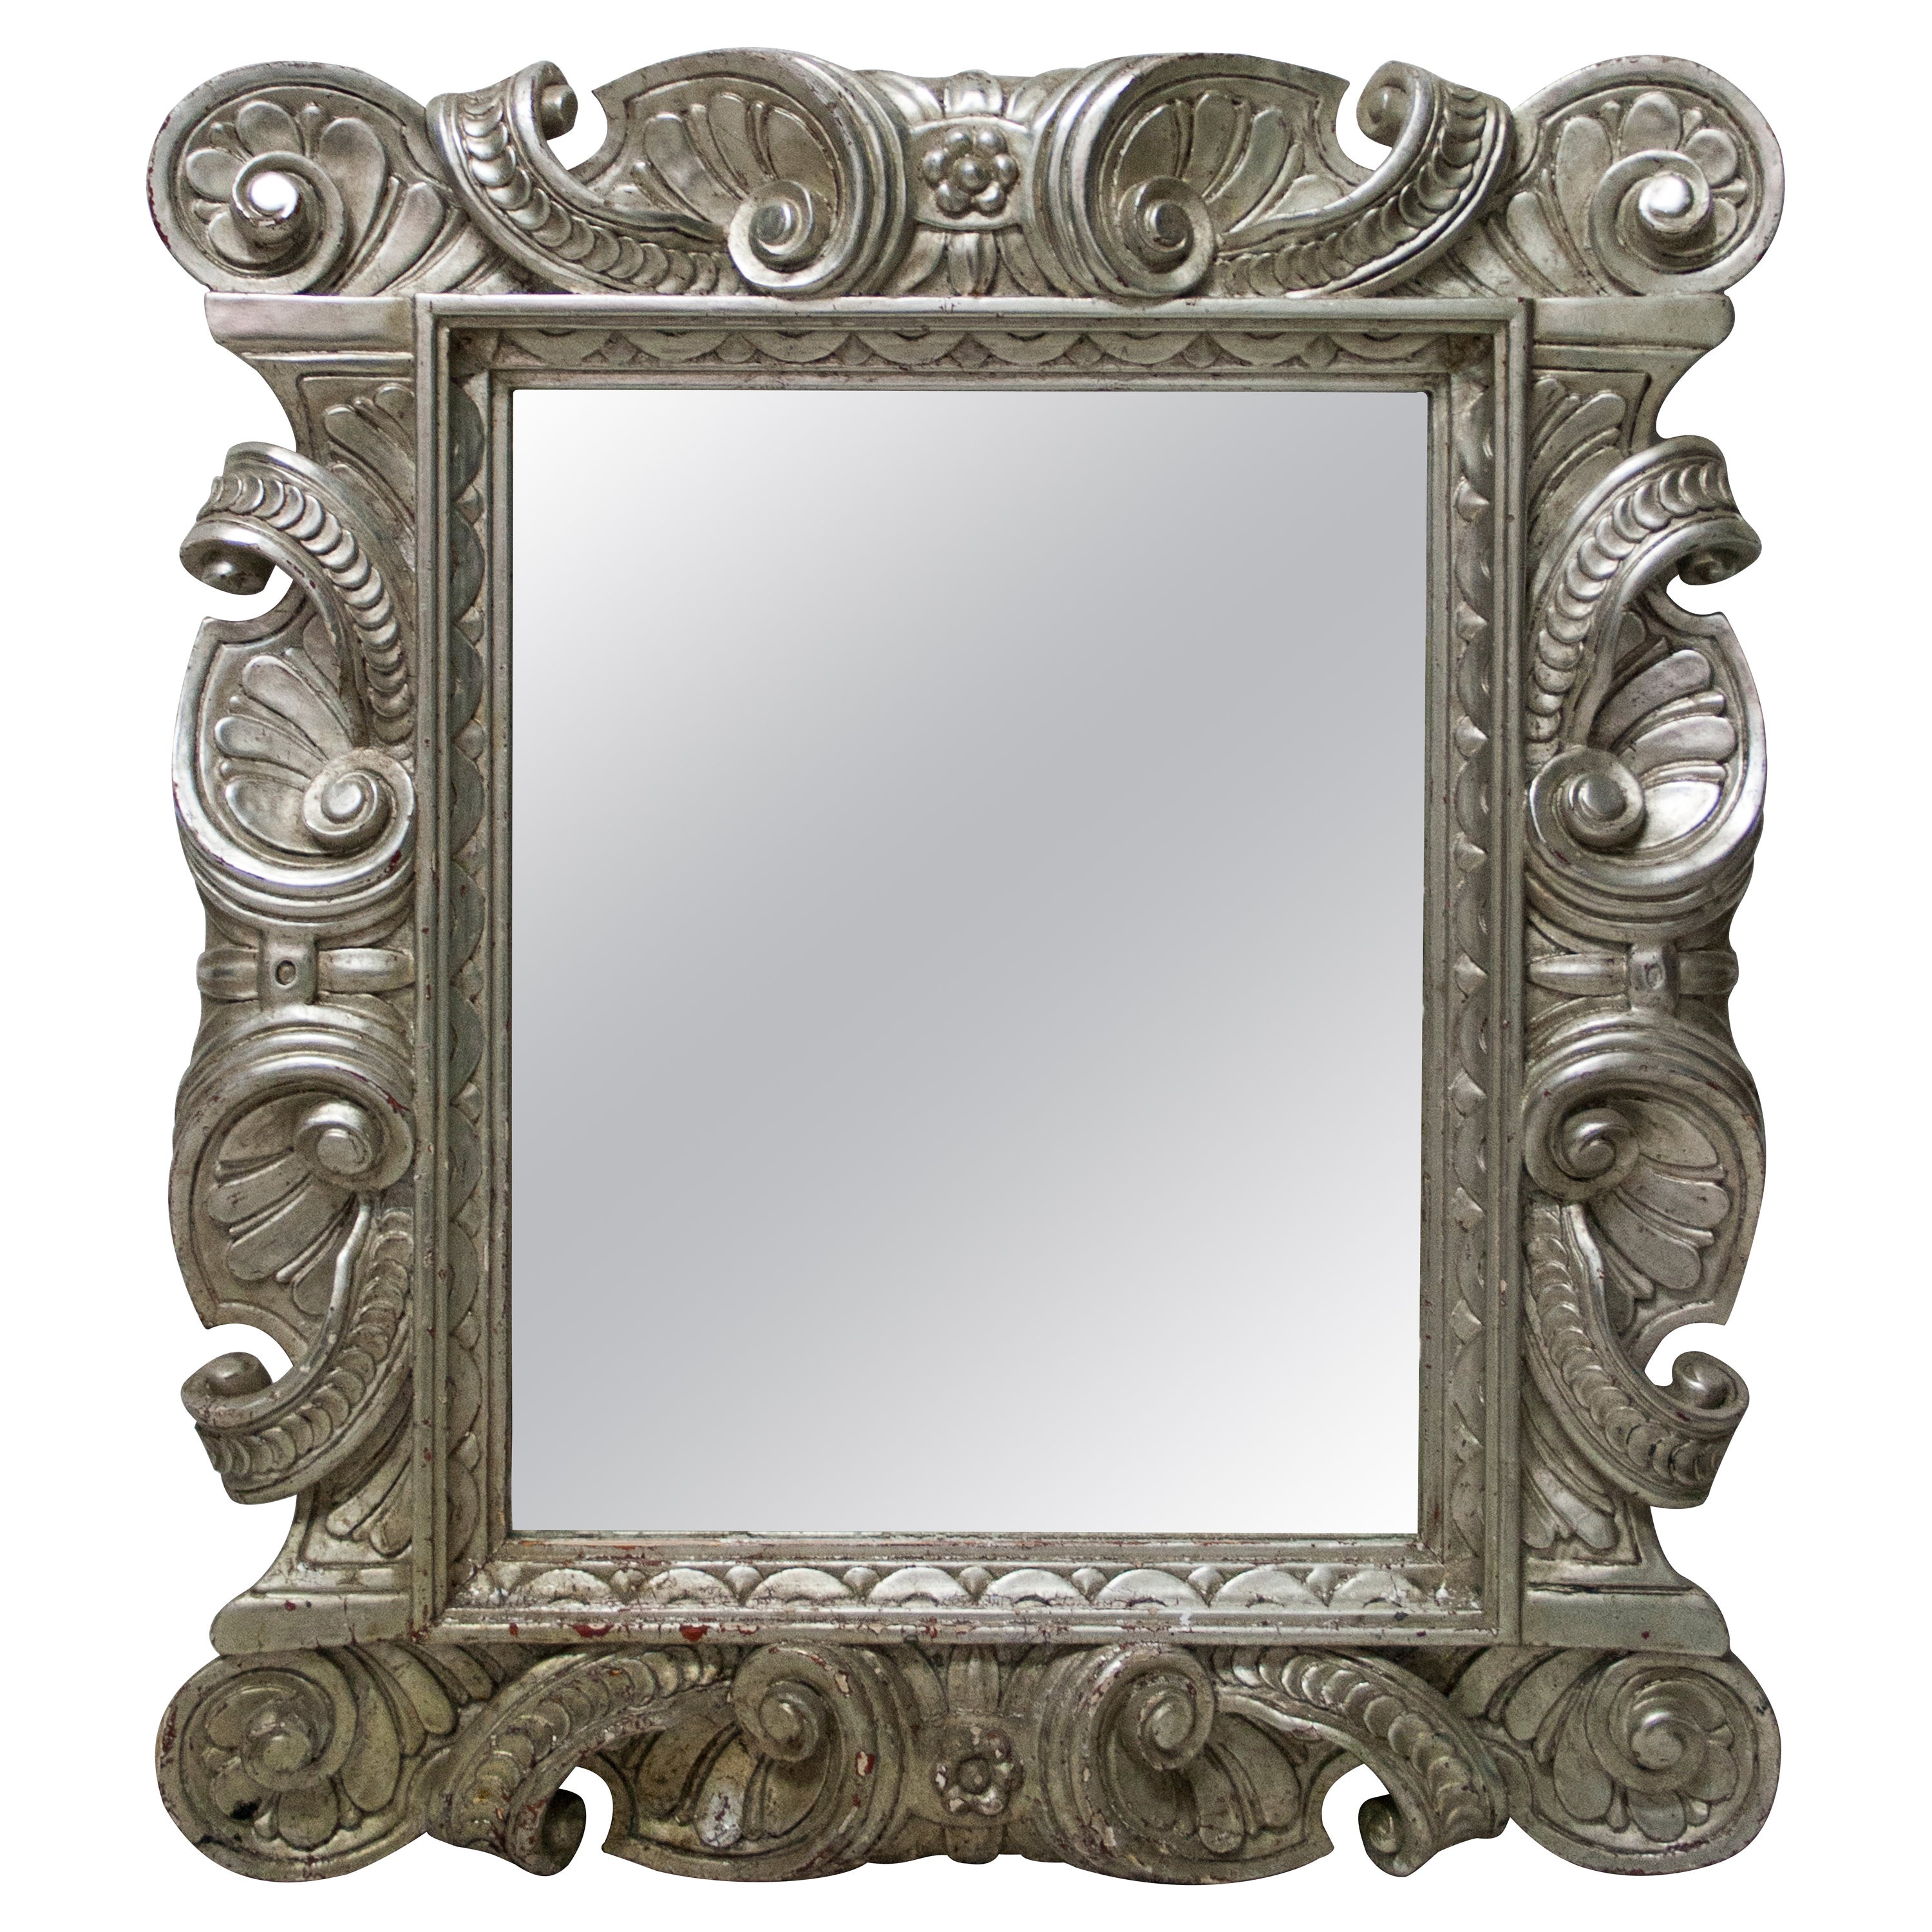 Neoclassical Regency Empire Style Bath Wood Mirror, 1970 For Sale